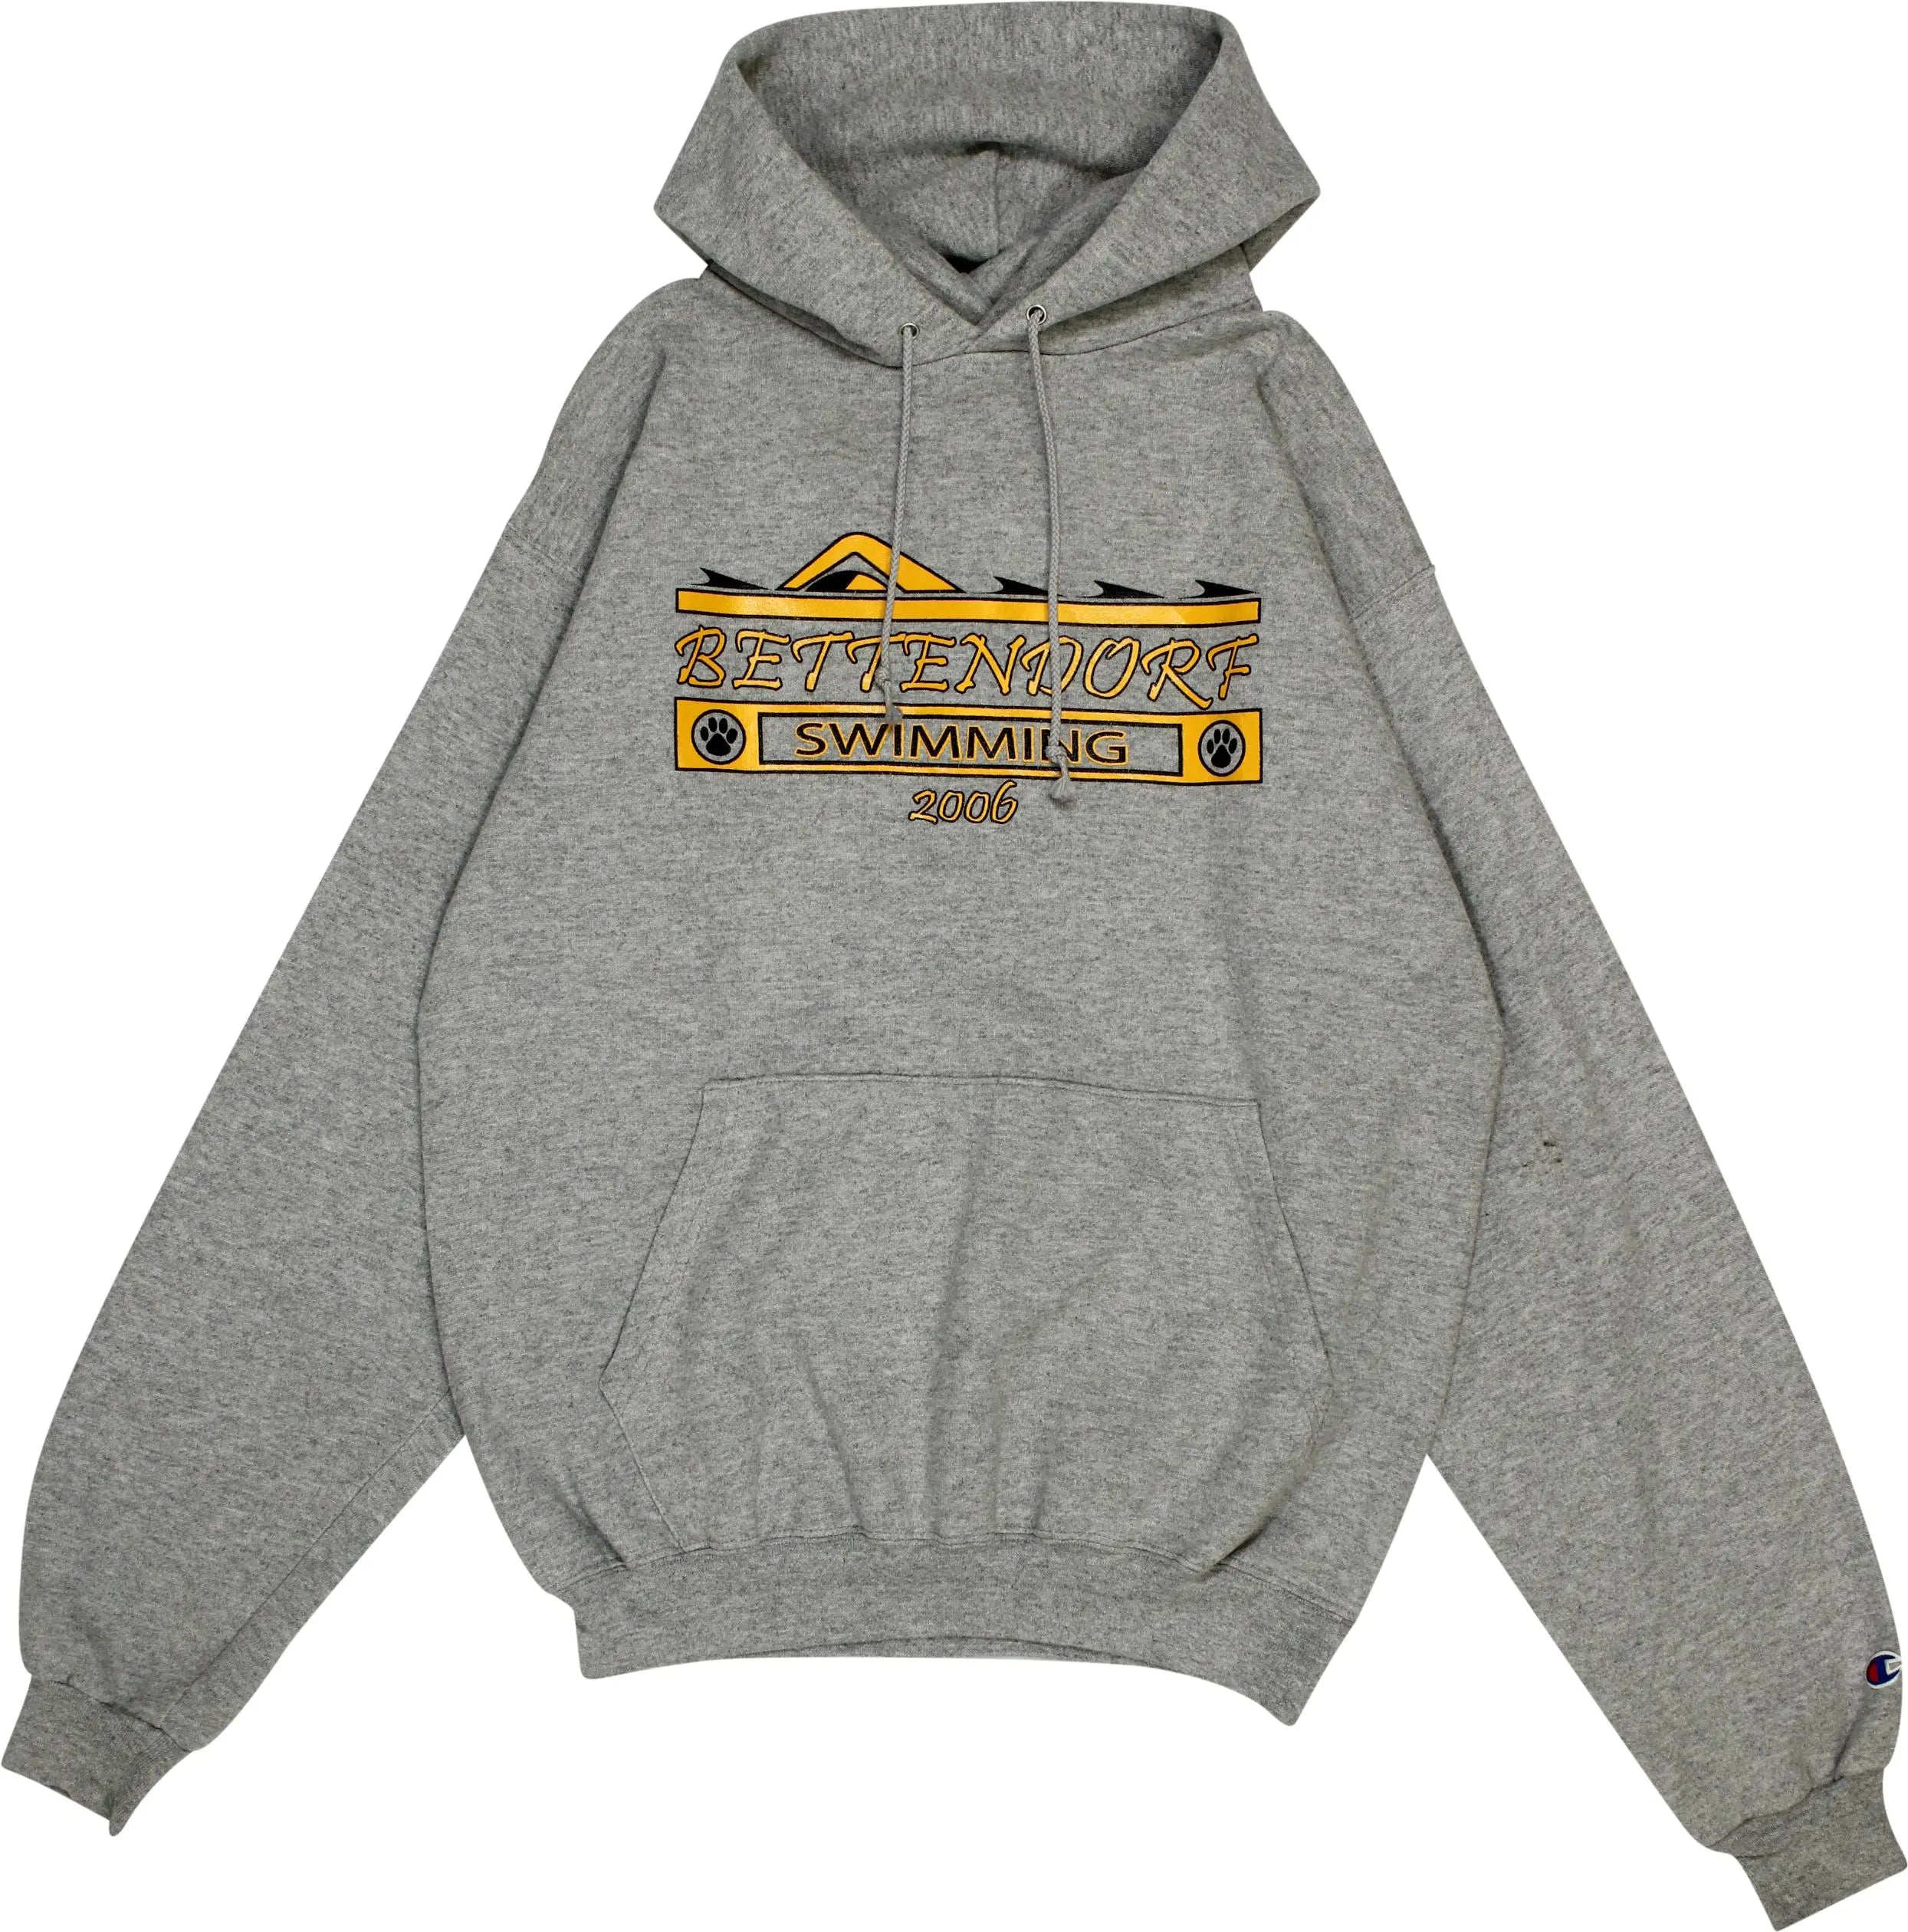 Champion - High School Bettendorf Swimming Hoodie- ThriftTale.com - Vintage and second handclothing